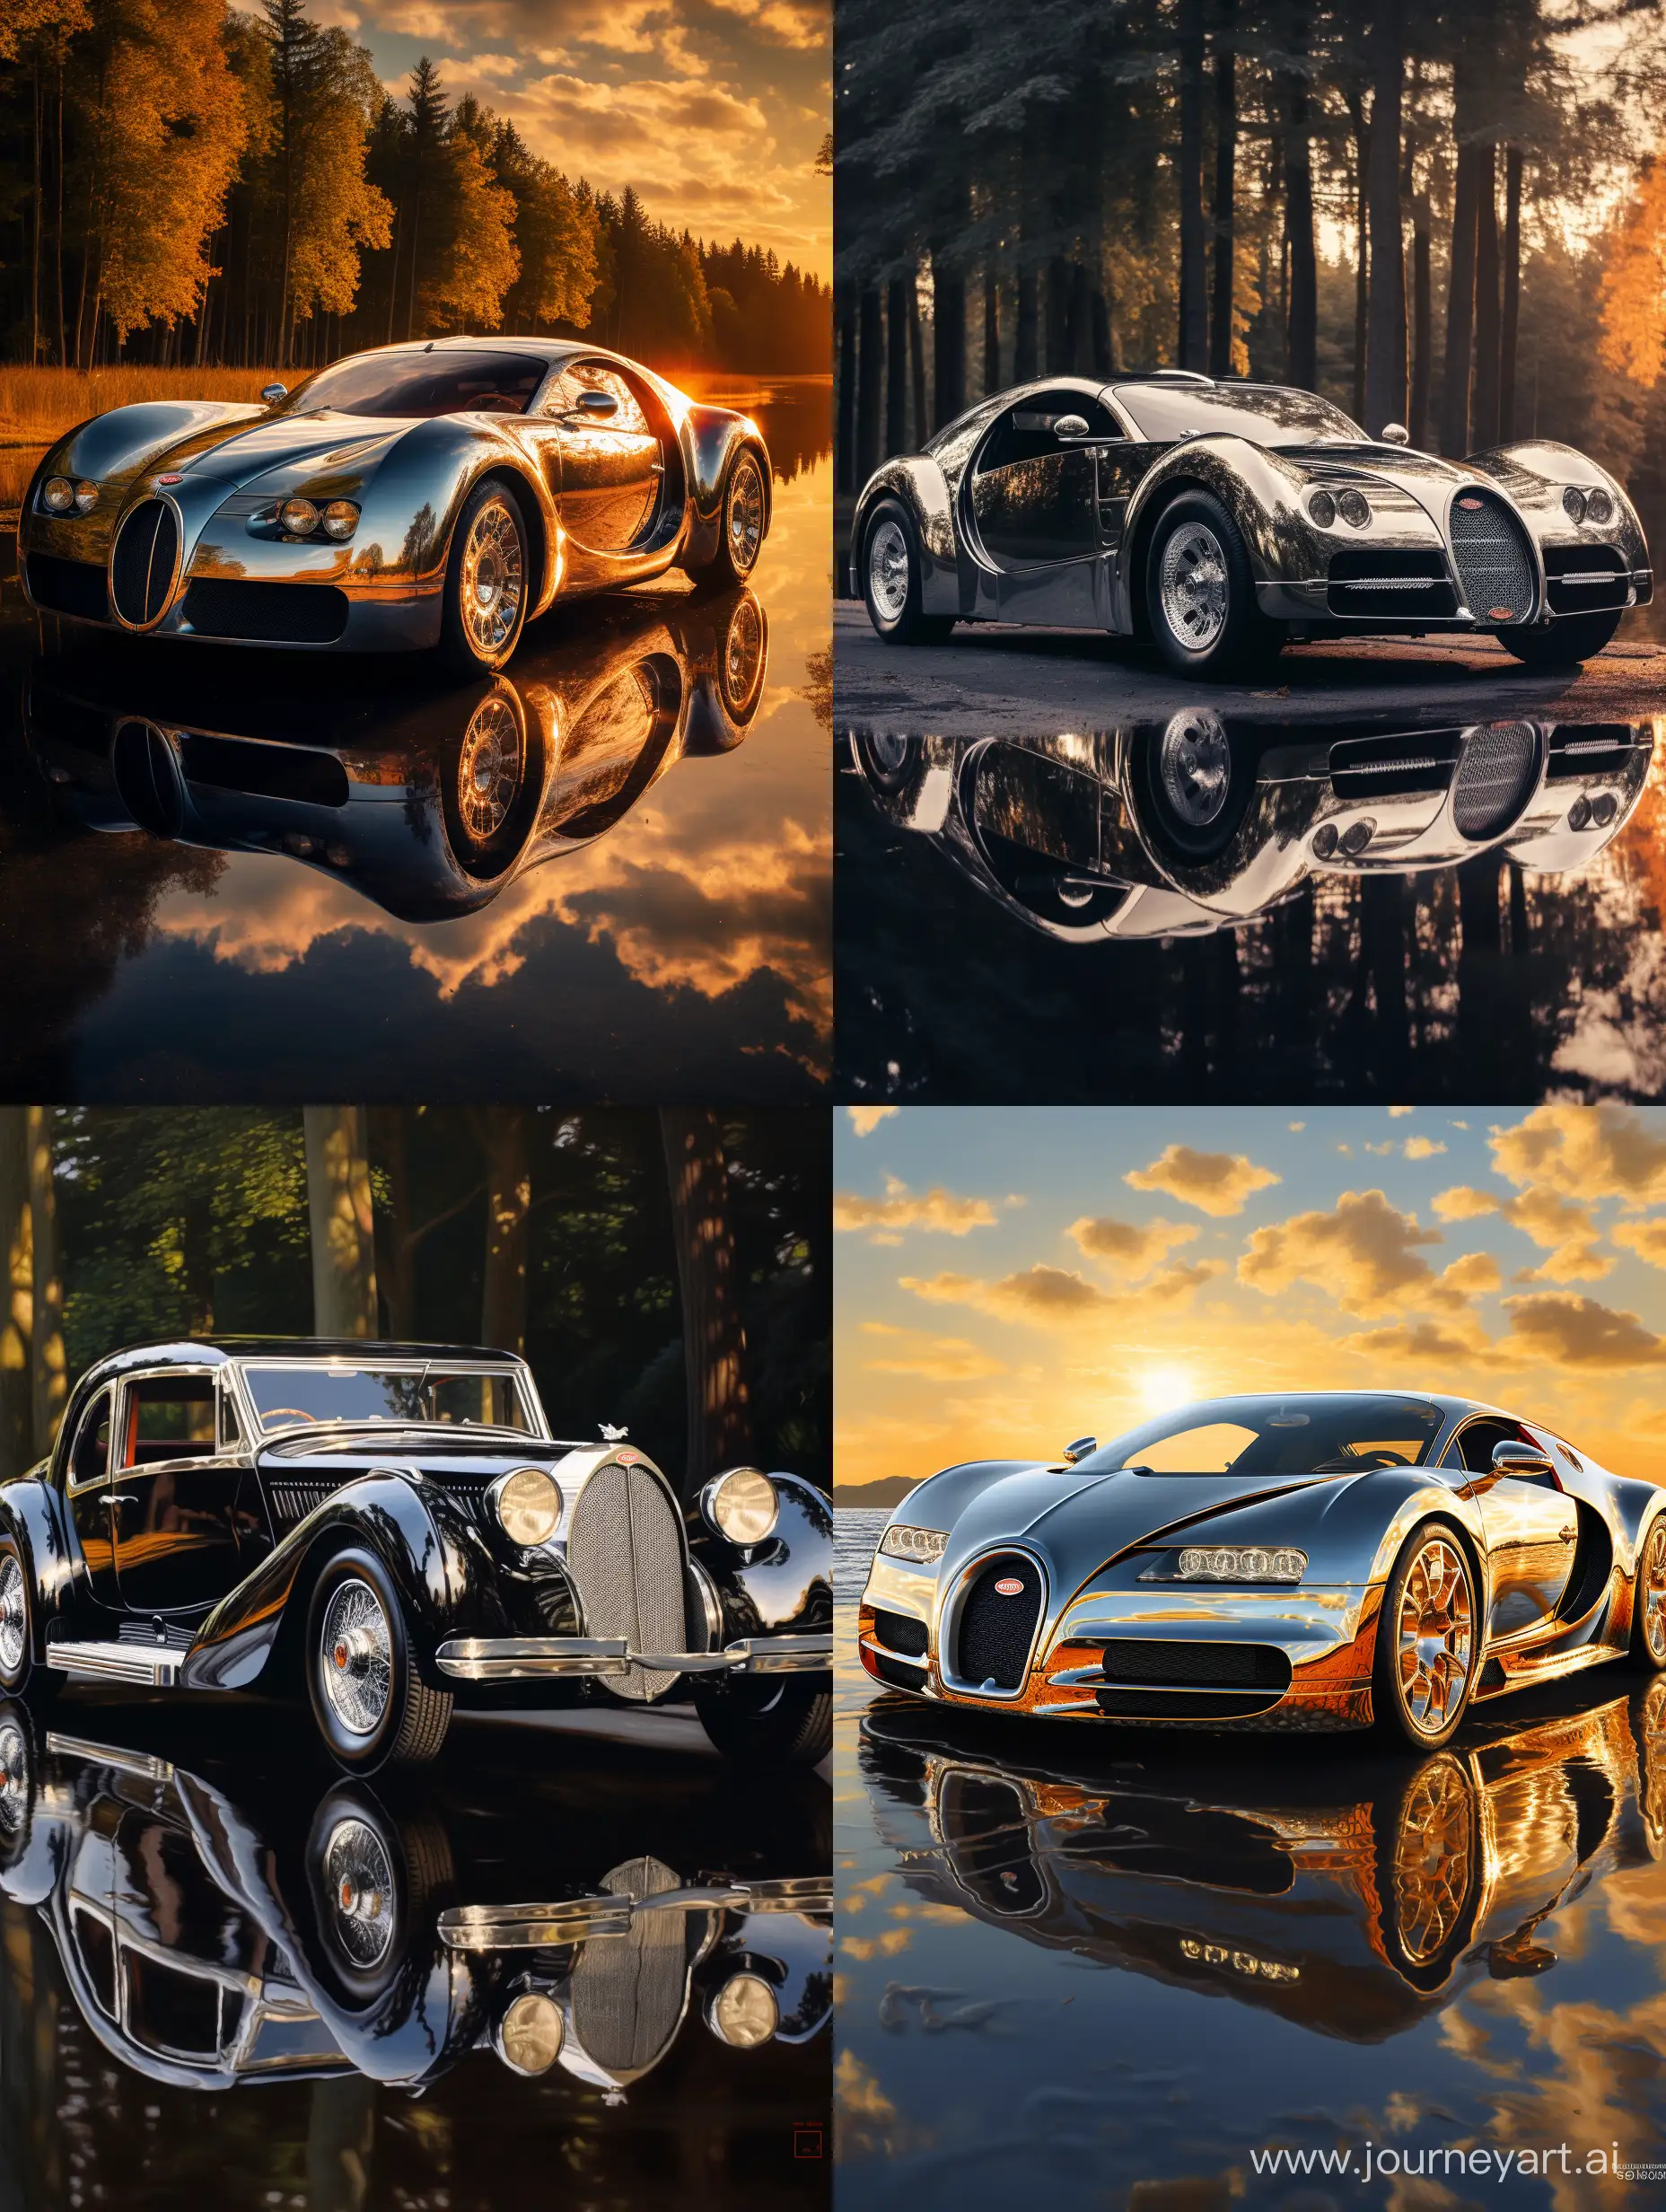 Epic realism buggati car in water sunlight reflections in car raw style